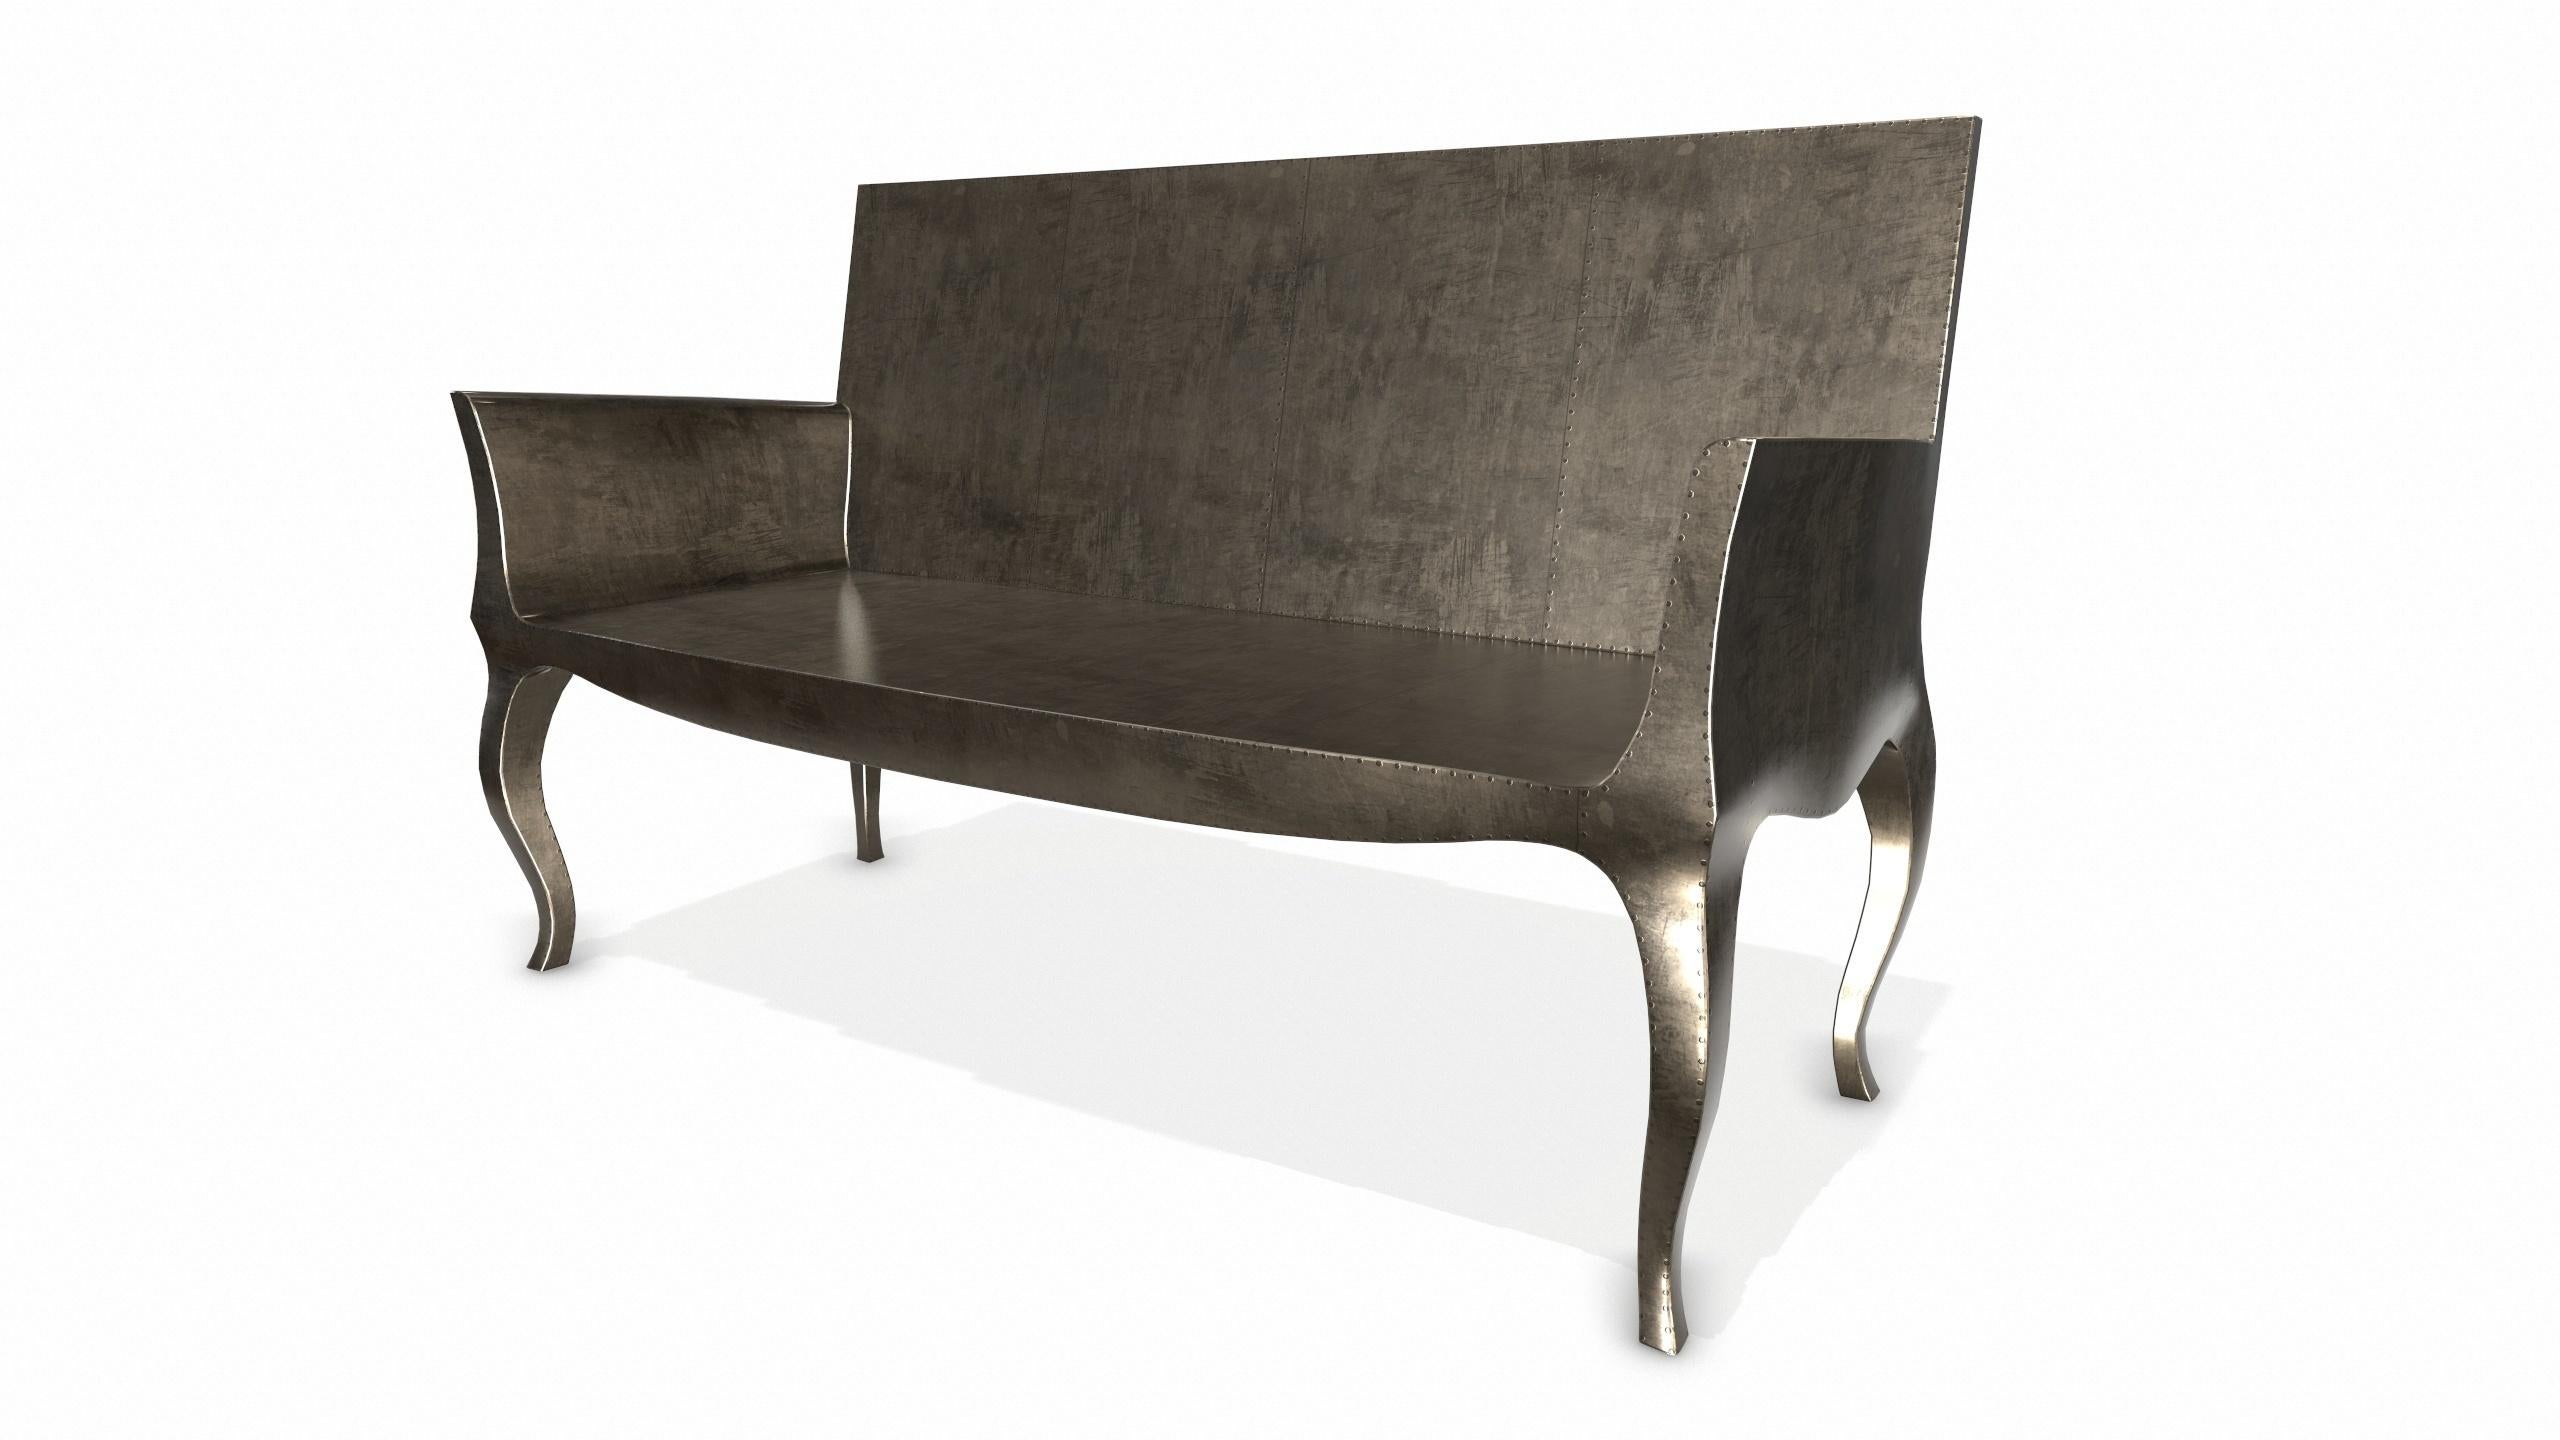 American Louise Settee Art Deco Benches in Smooth Antique Bronze by Paul Mathieu For Sale